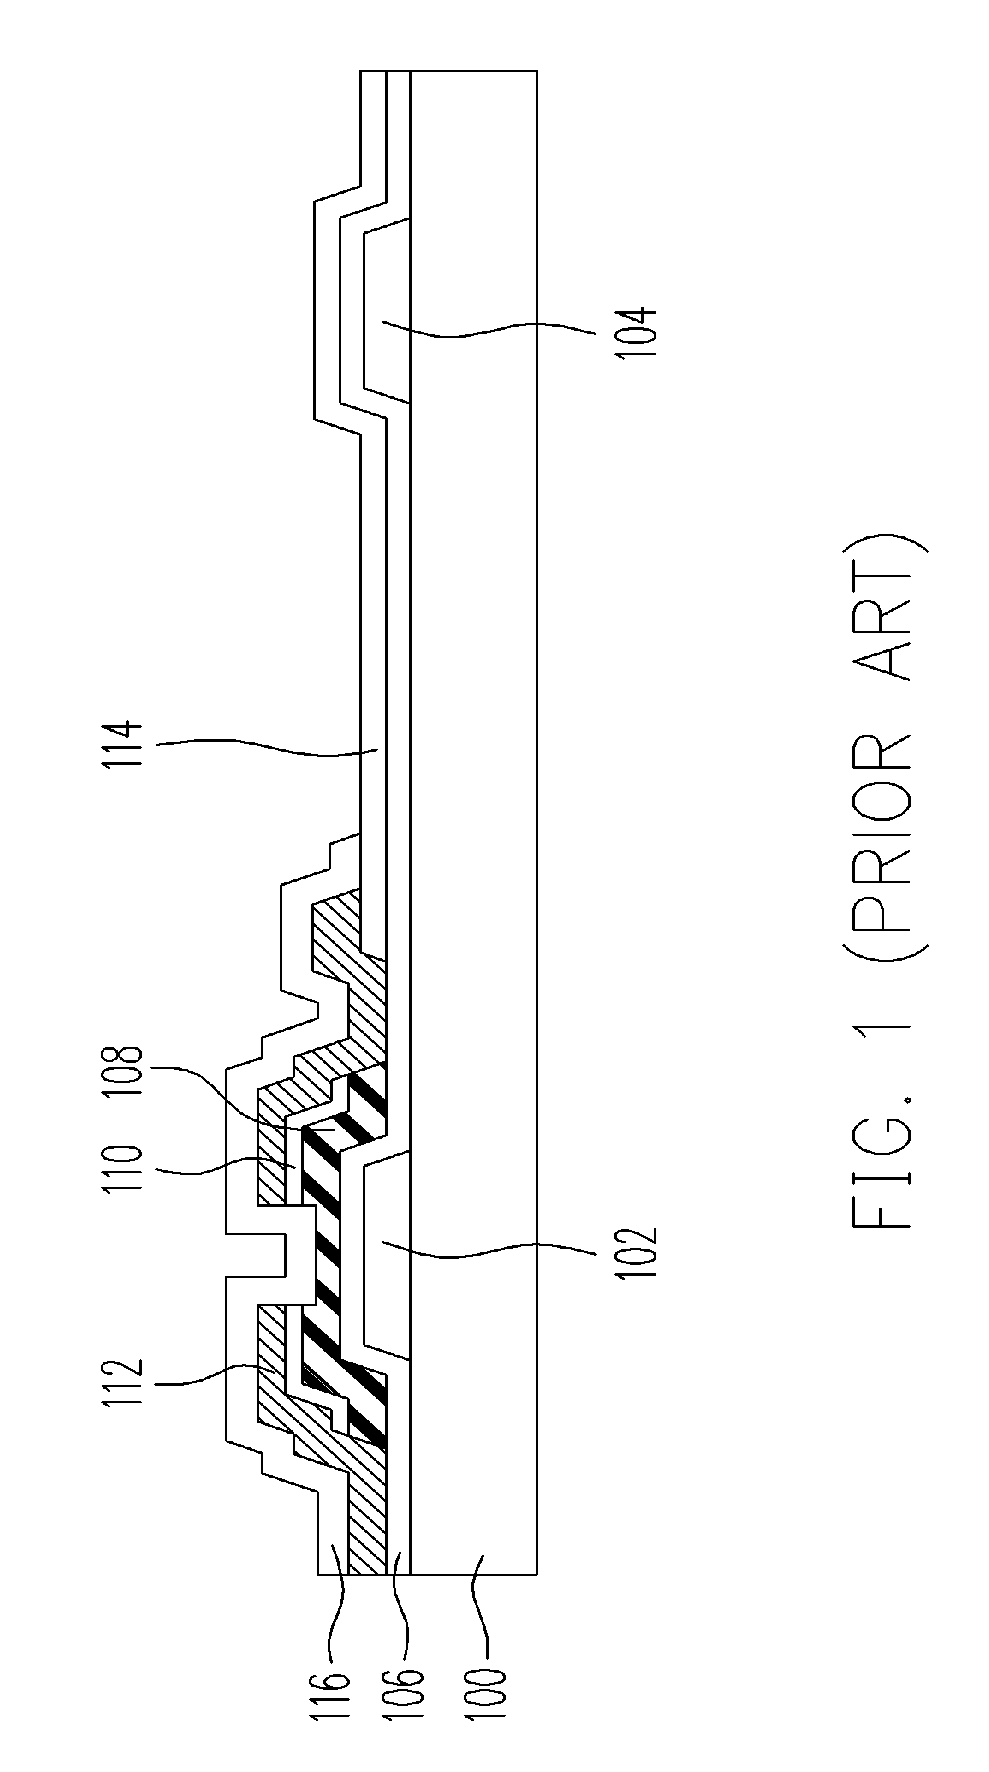 Structure of thin film transistor array and method for fabricating the same